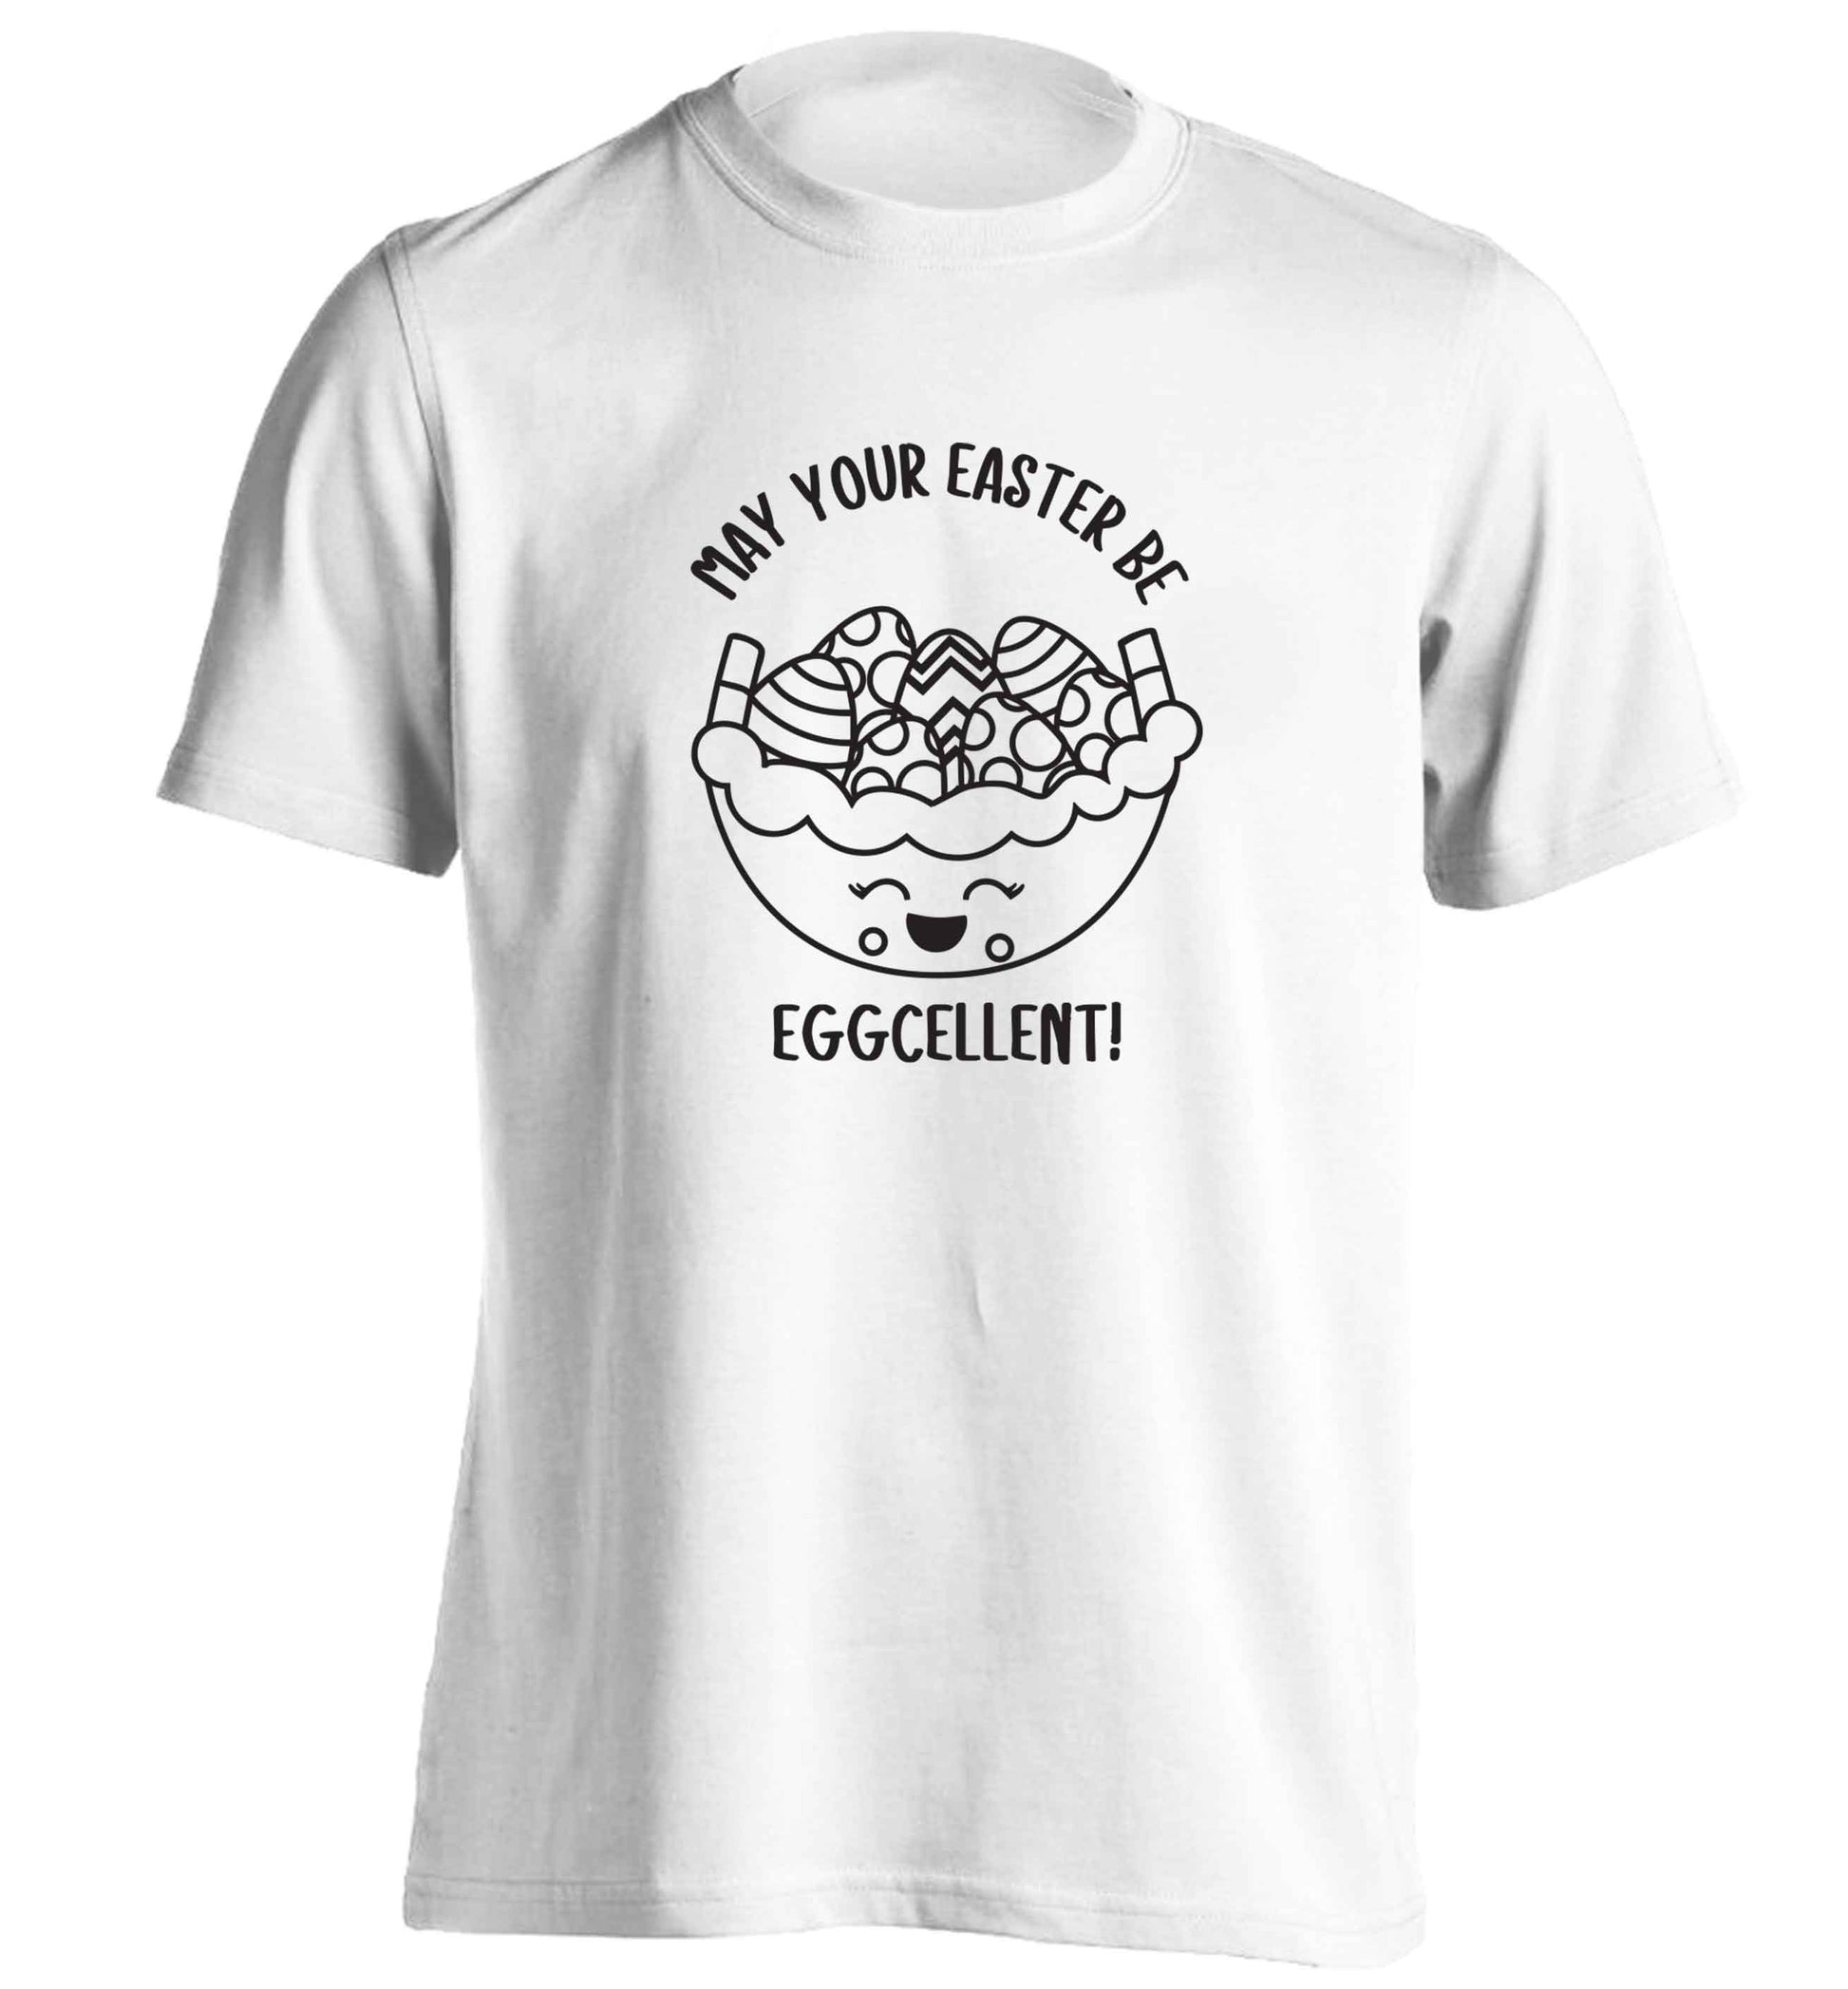 May your Easter be eggcellent adults unisex white Tshirt 2XL